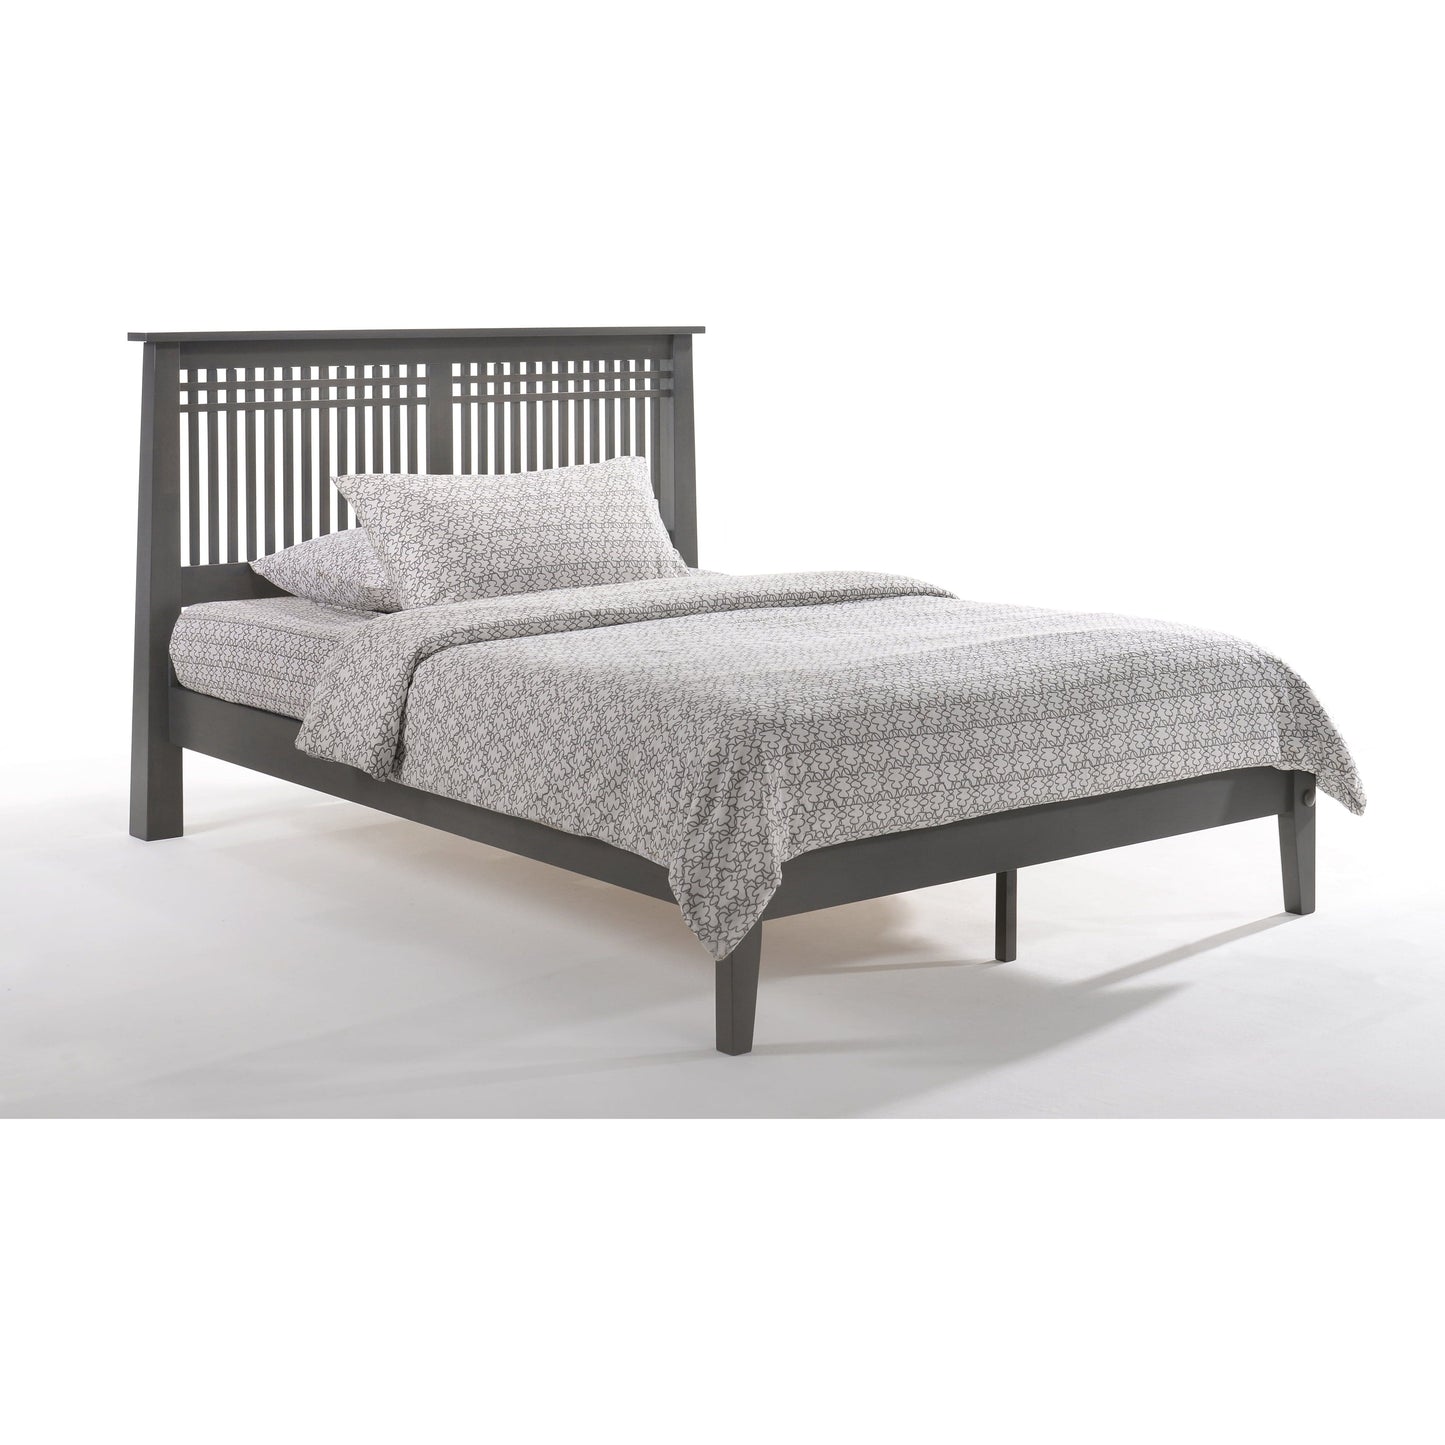 Night And Day King Solstice Bed in cherry finish (P Series) SOL-PH-EKG-COM-P-CH